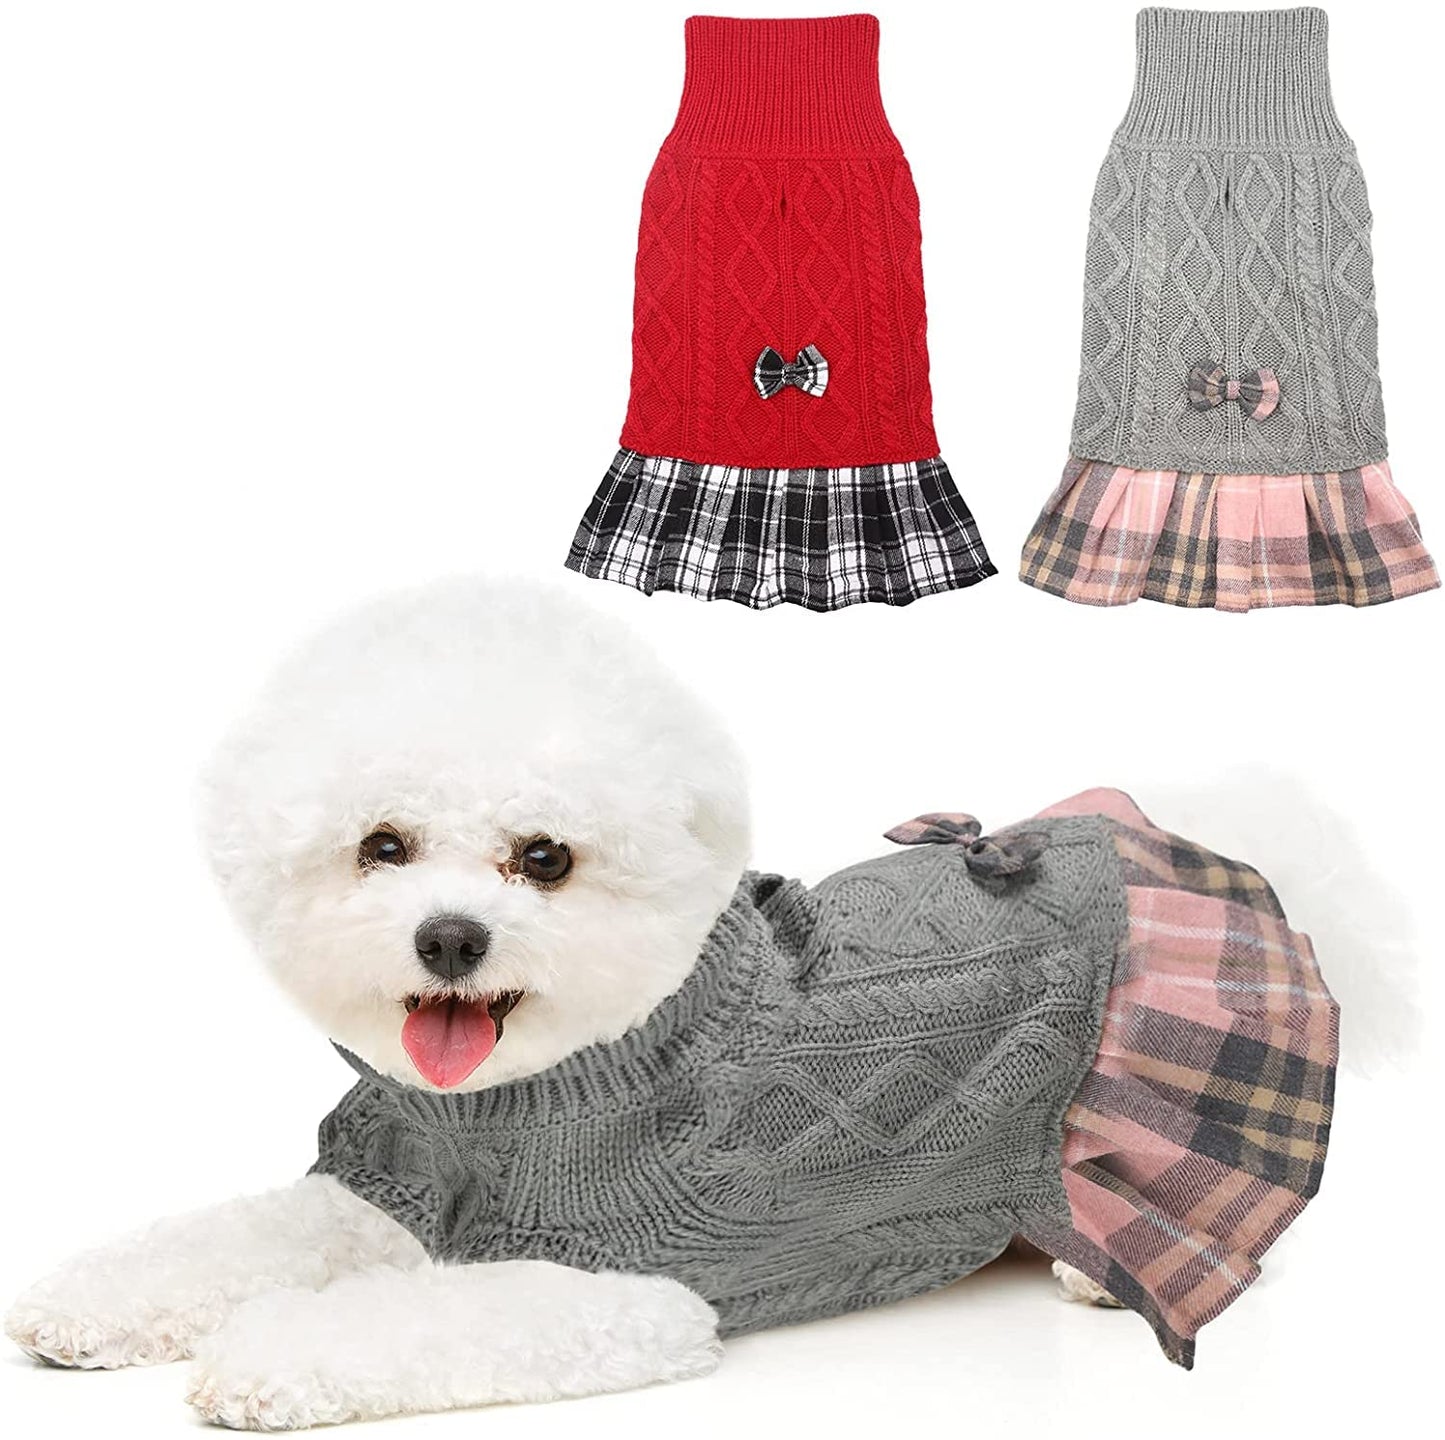 KUTKUT Pack of 2 Plaid Sweater Dress with Bowtie for Small Dogs - Dog Turtleneck Pullover Knitwear Cold Weather Sweater with Leash Hole, Suitable for Small Dogs, Cats Puppies-Clothing-kutkutstyle